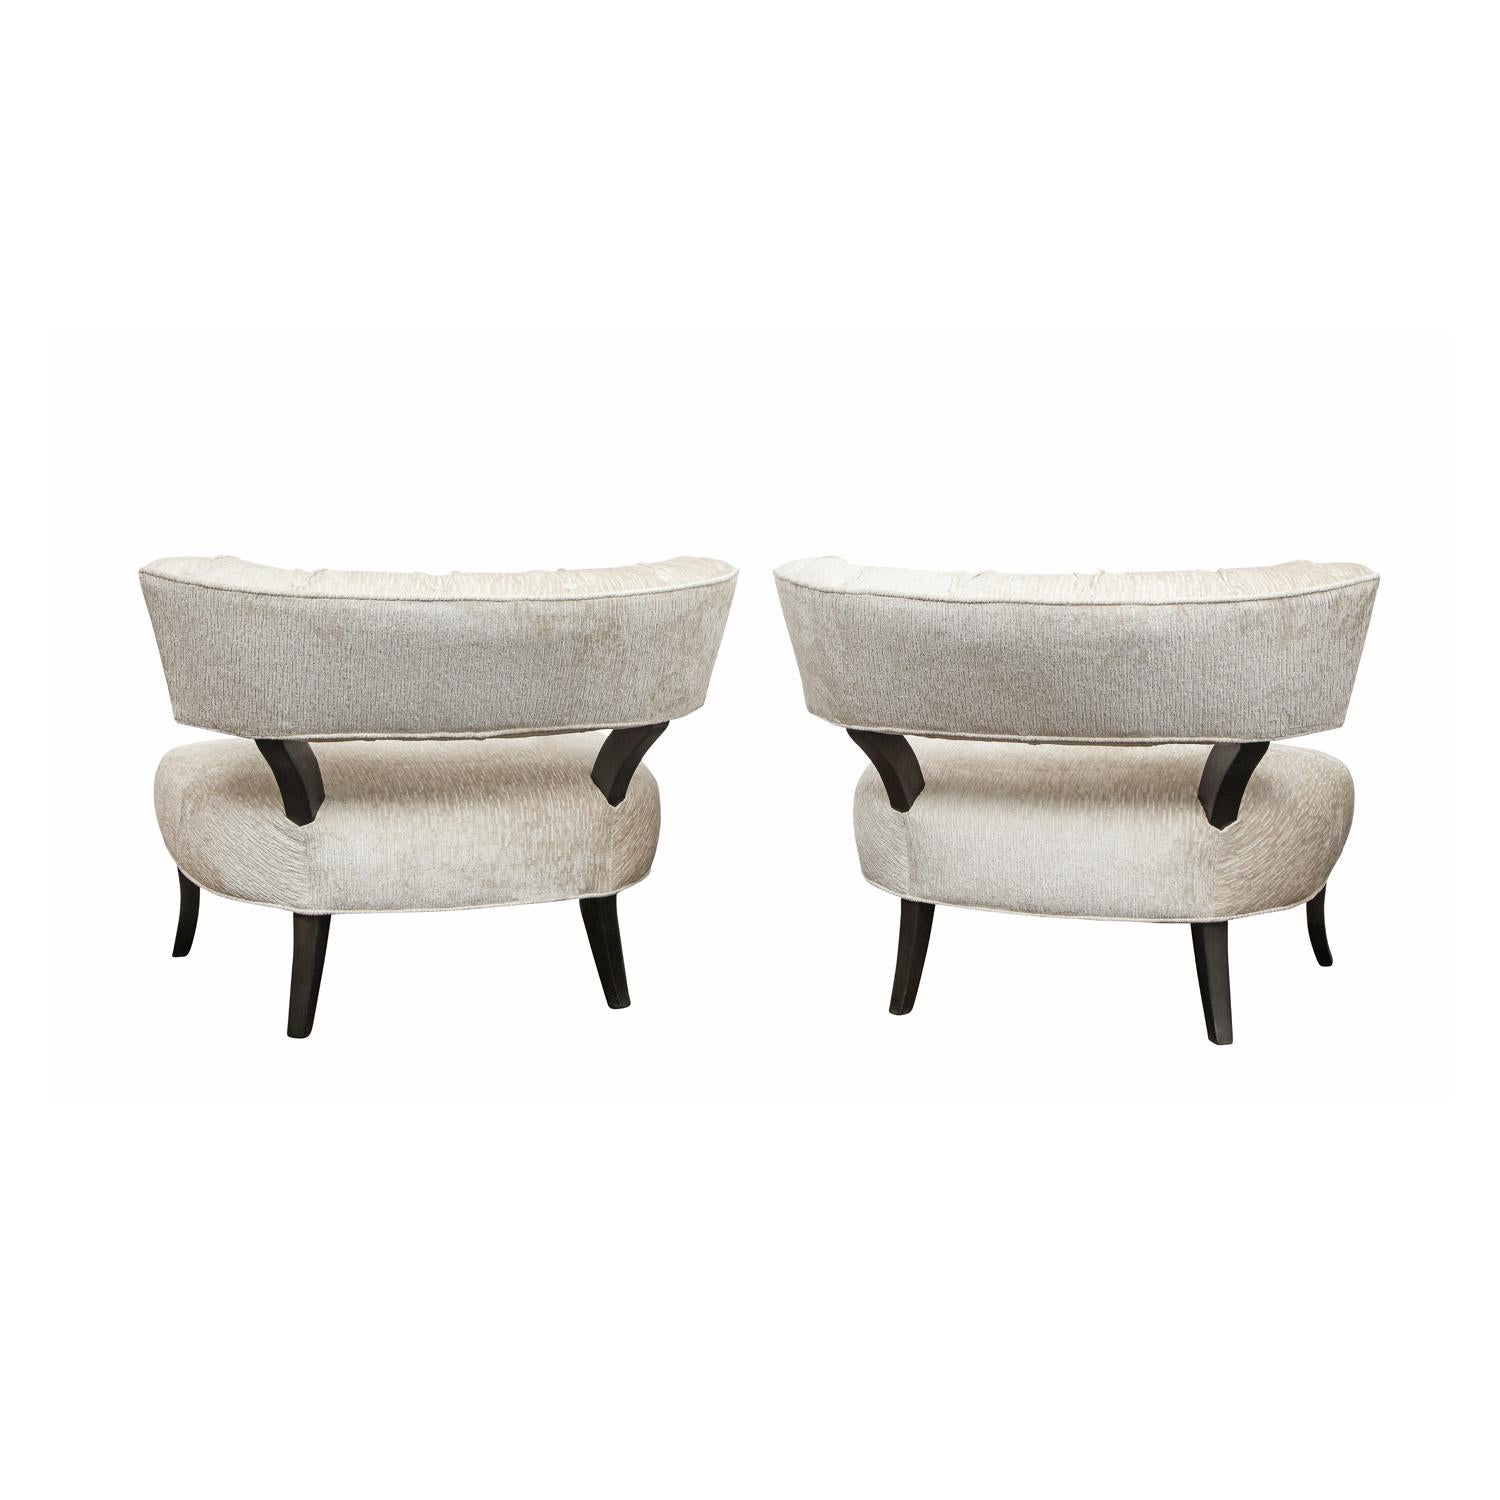 Mid-Century Modern Pair of Elegant Slipper Chairs in The Manner of Billy Haines 1940s For Sale